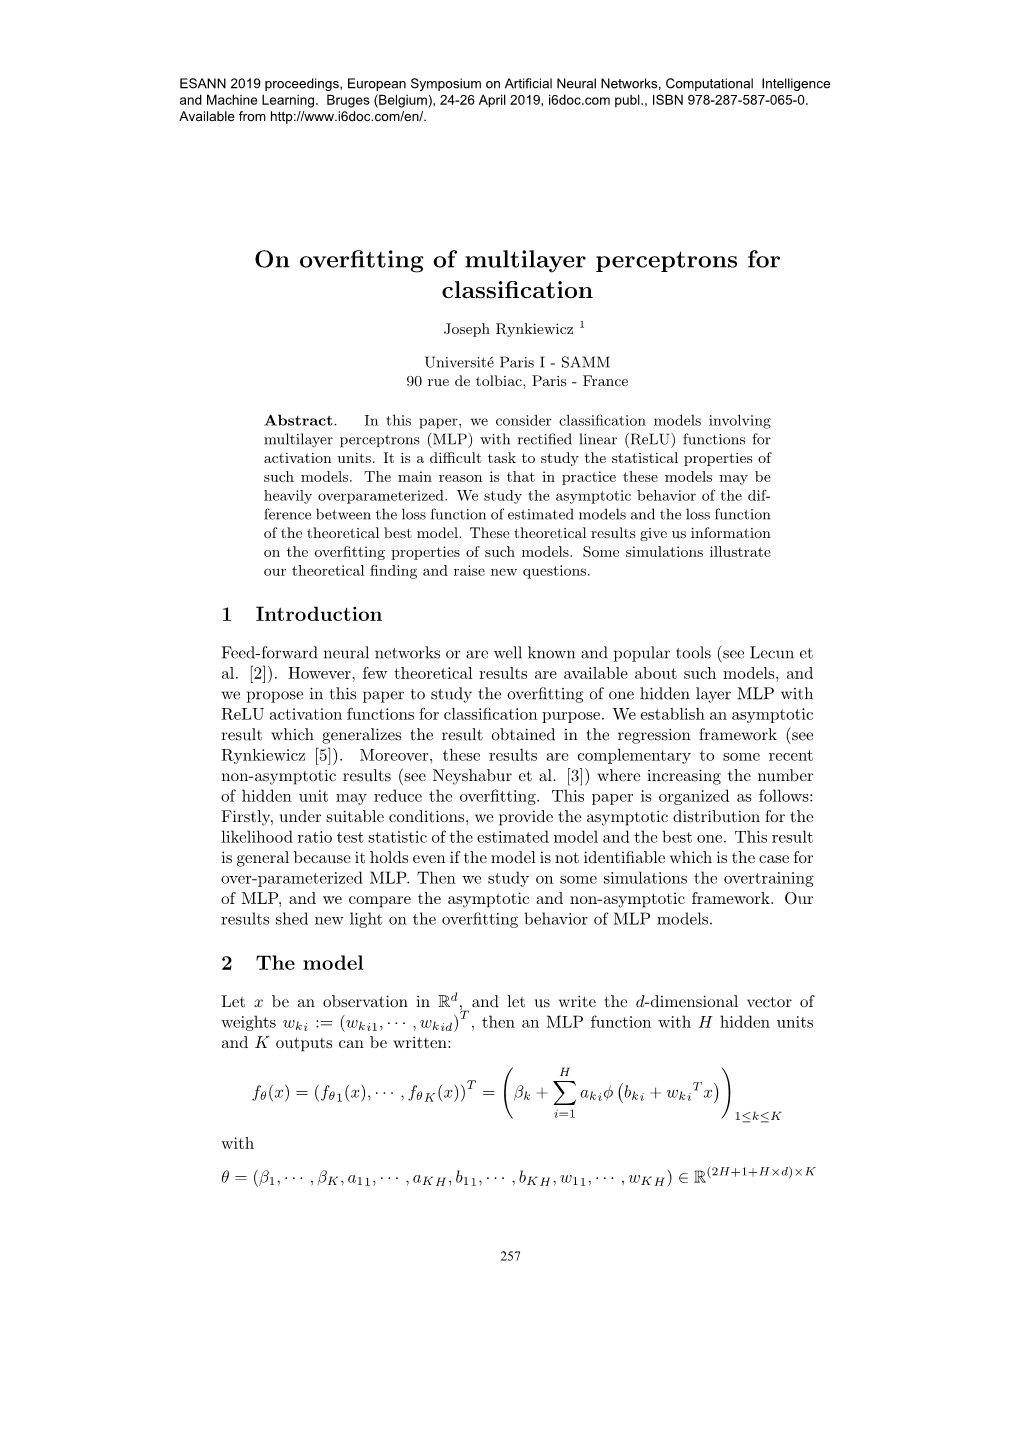 On Overfitting of Multilayer Perceptrons for Classification